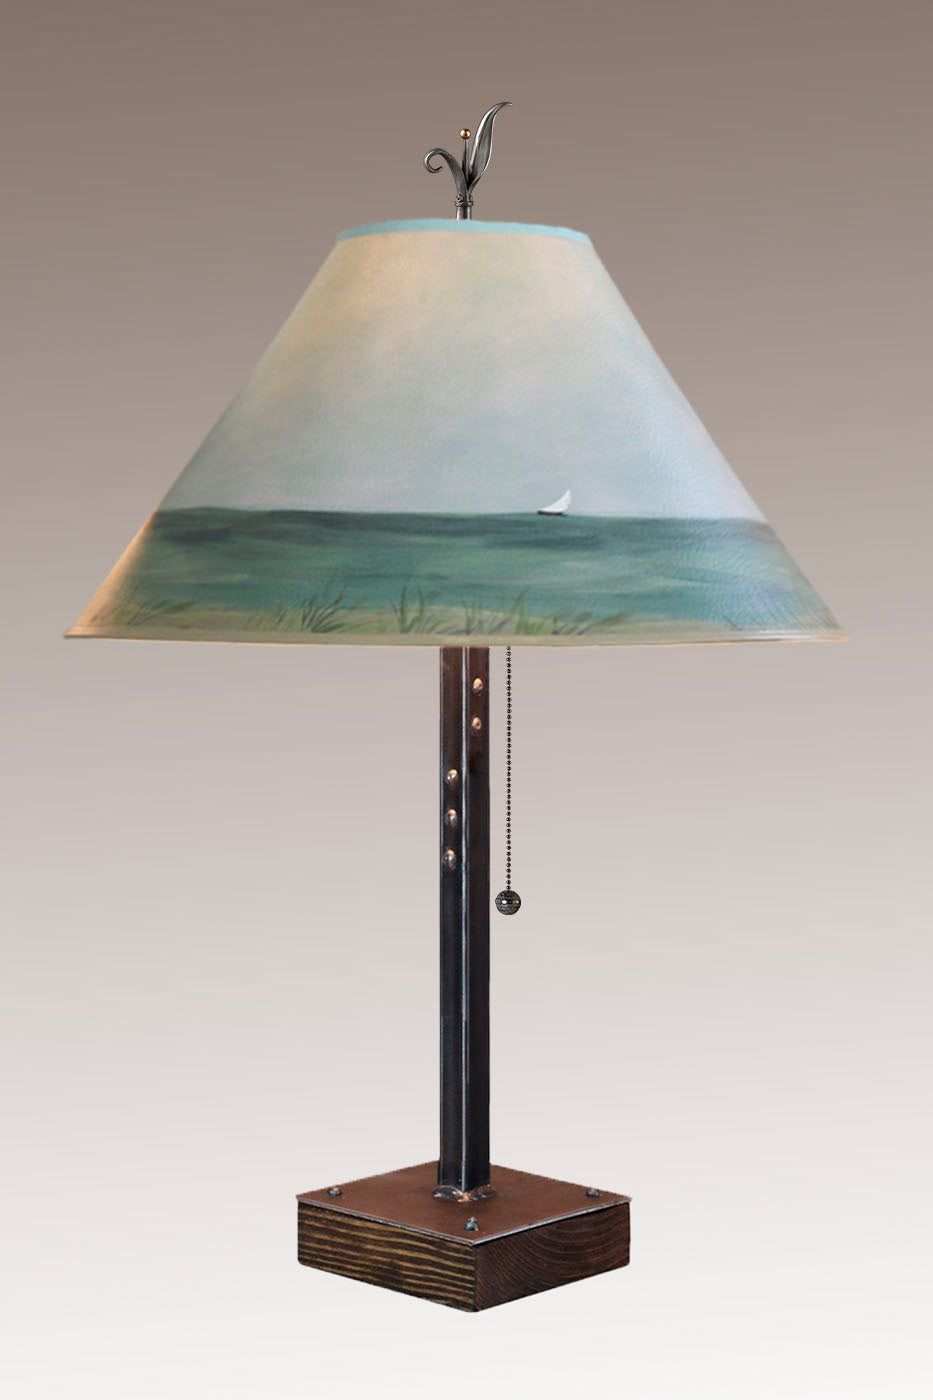 Janna Ugone & Co Table Lamps Steel Table Lamp on Wood with Large Conical Shade in Shore